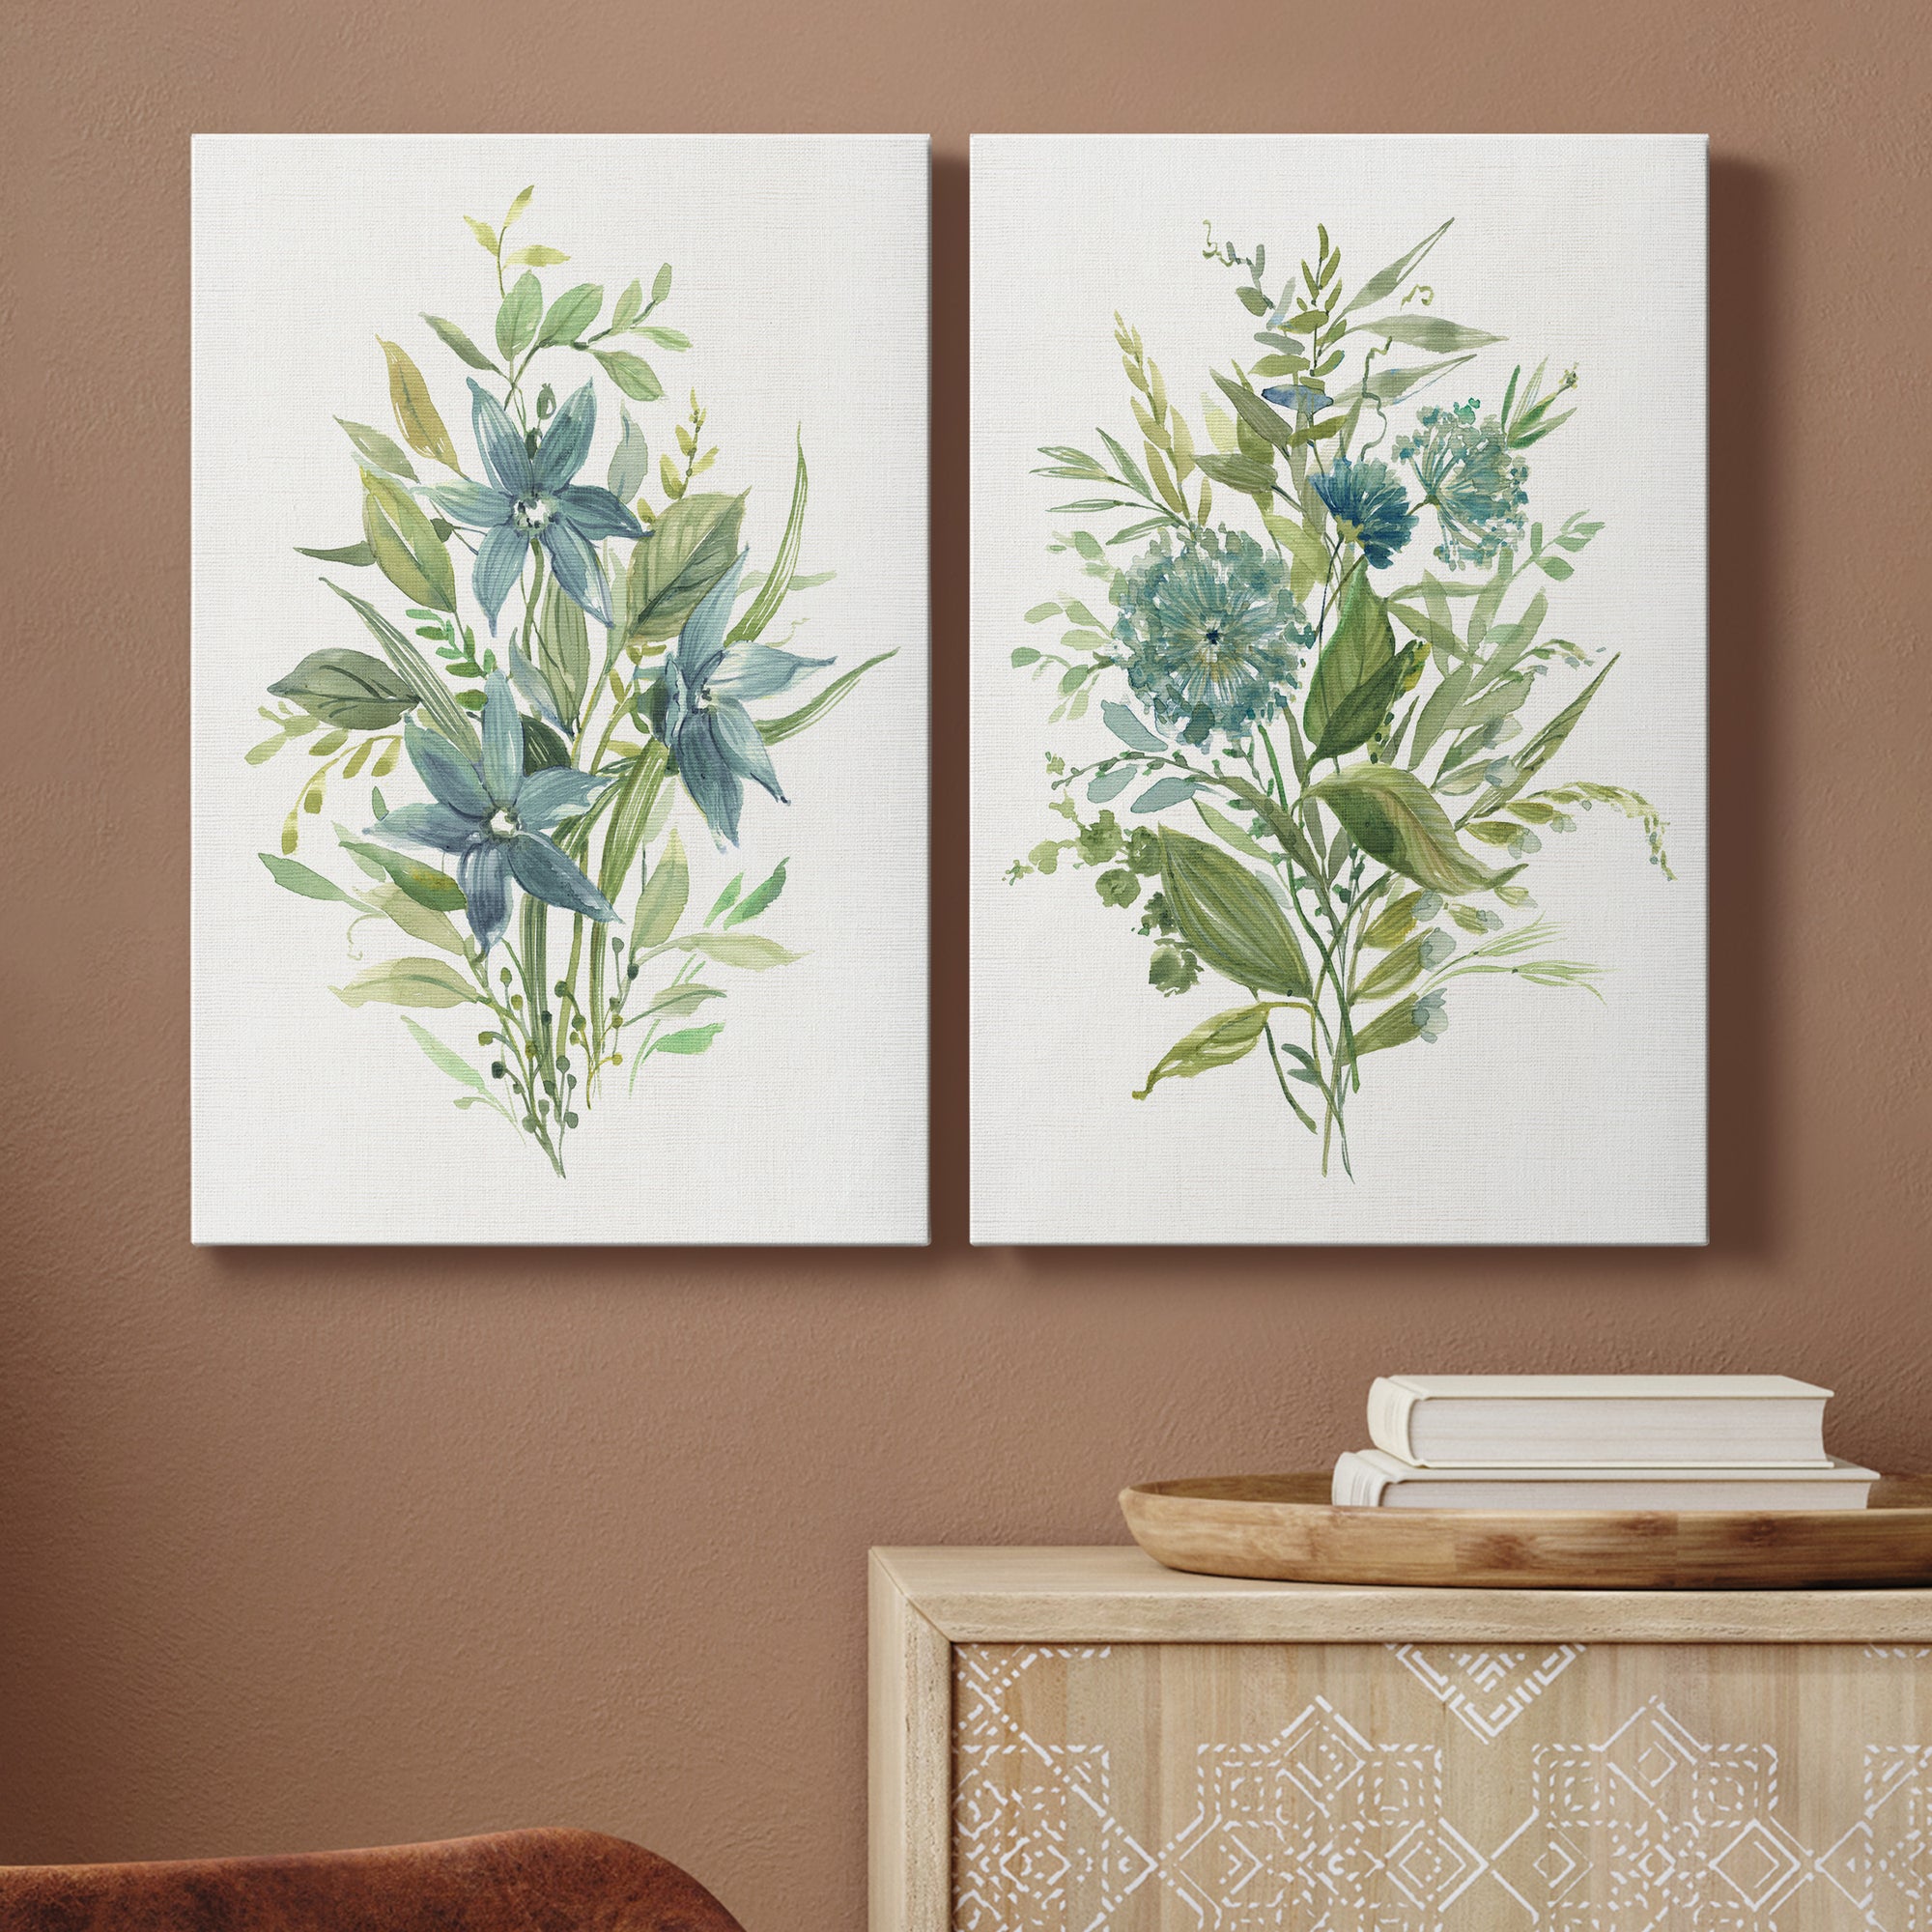 Greenery I Premium Gallery Wrapped Canvas - Ready to Hang - Set of 2 - 8 x 12 Each